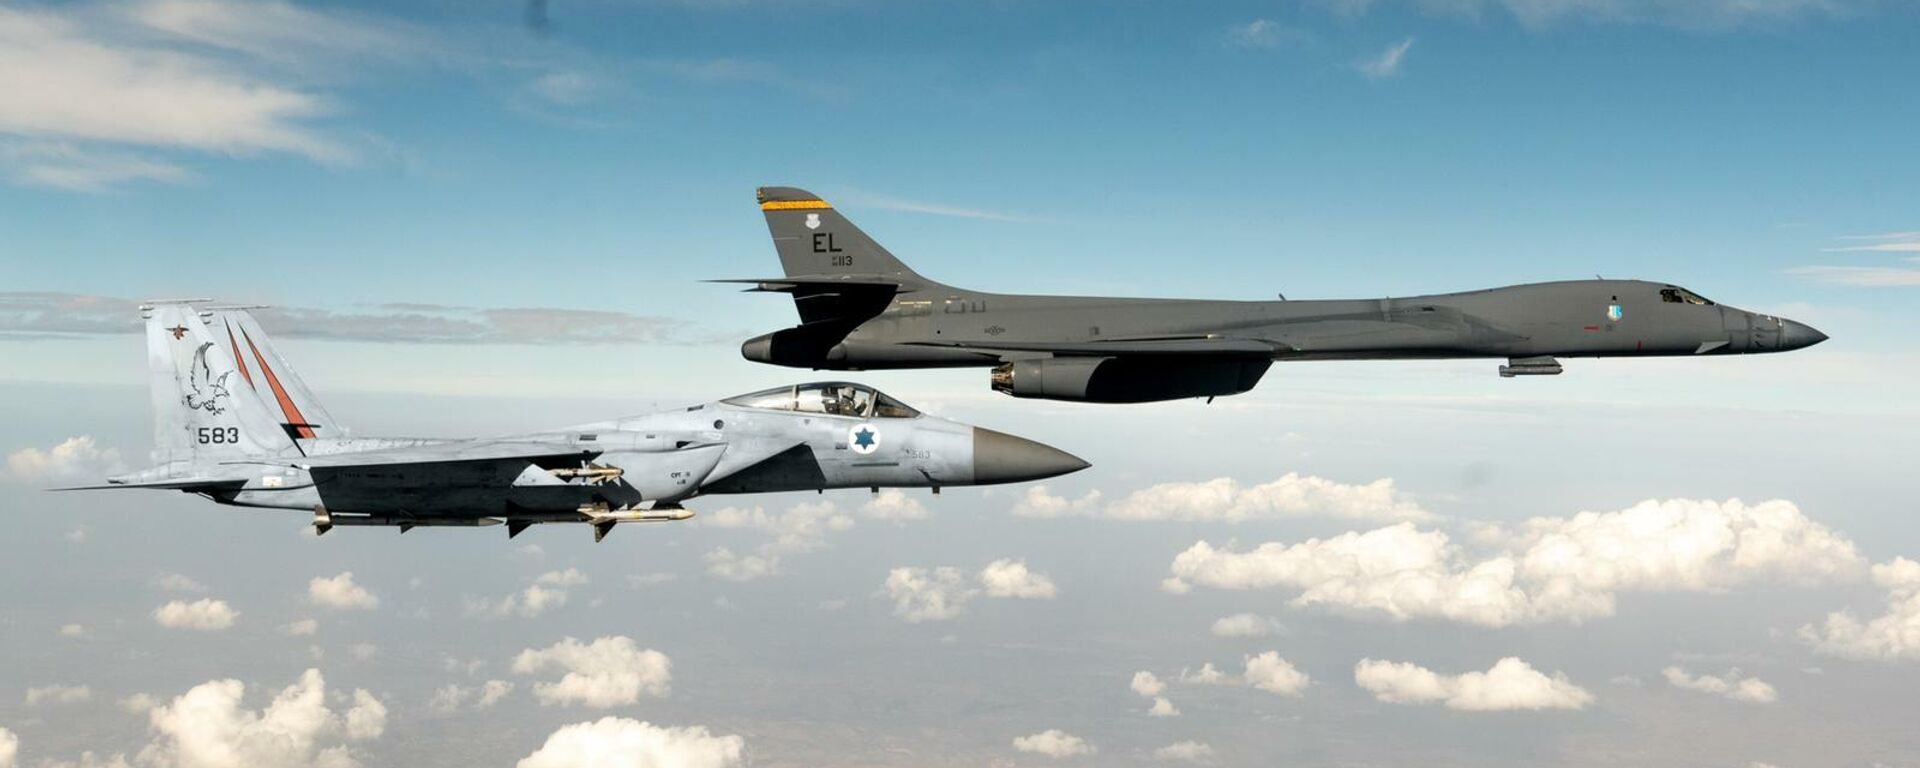 IDF says F-15 fighter jets escorted a US B-1 bomber over Israel's skies towards the Gulf on October 30, 2021. - Sputnik International, 1920, 10.12.2021